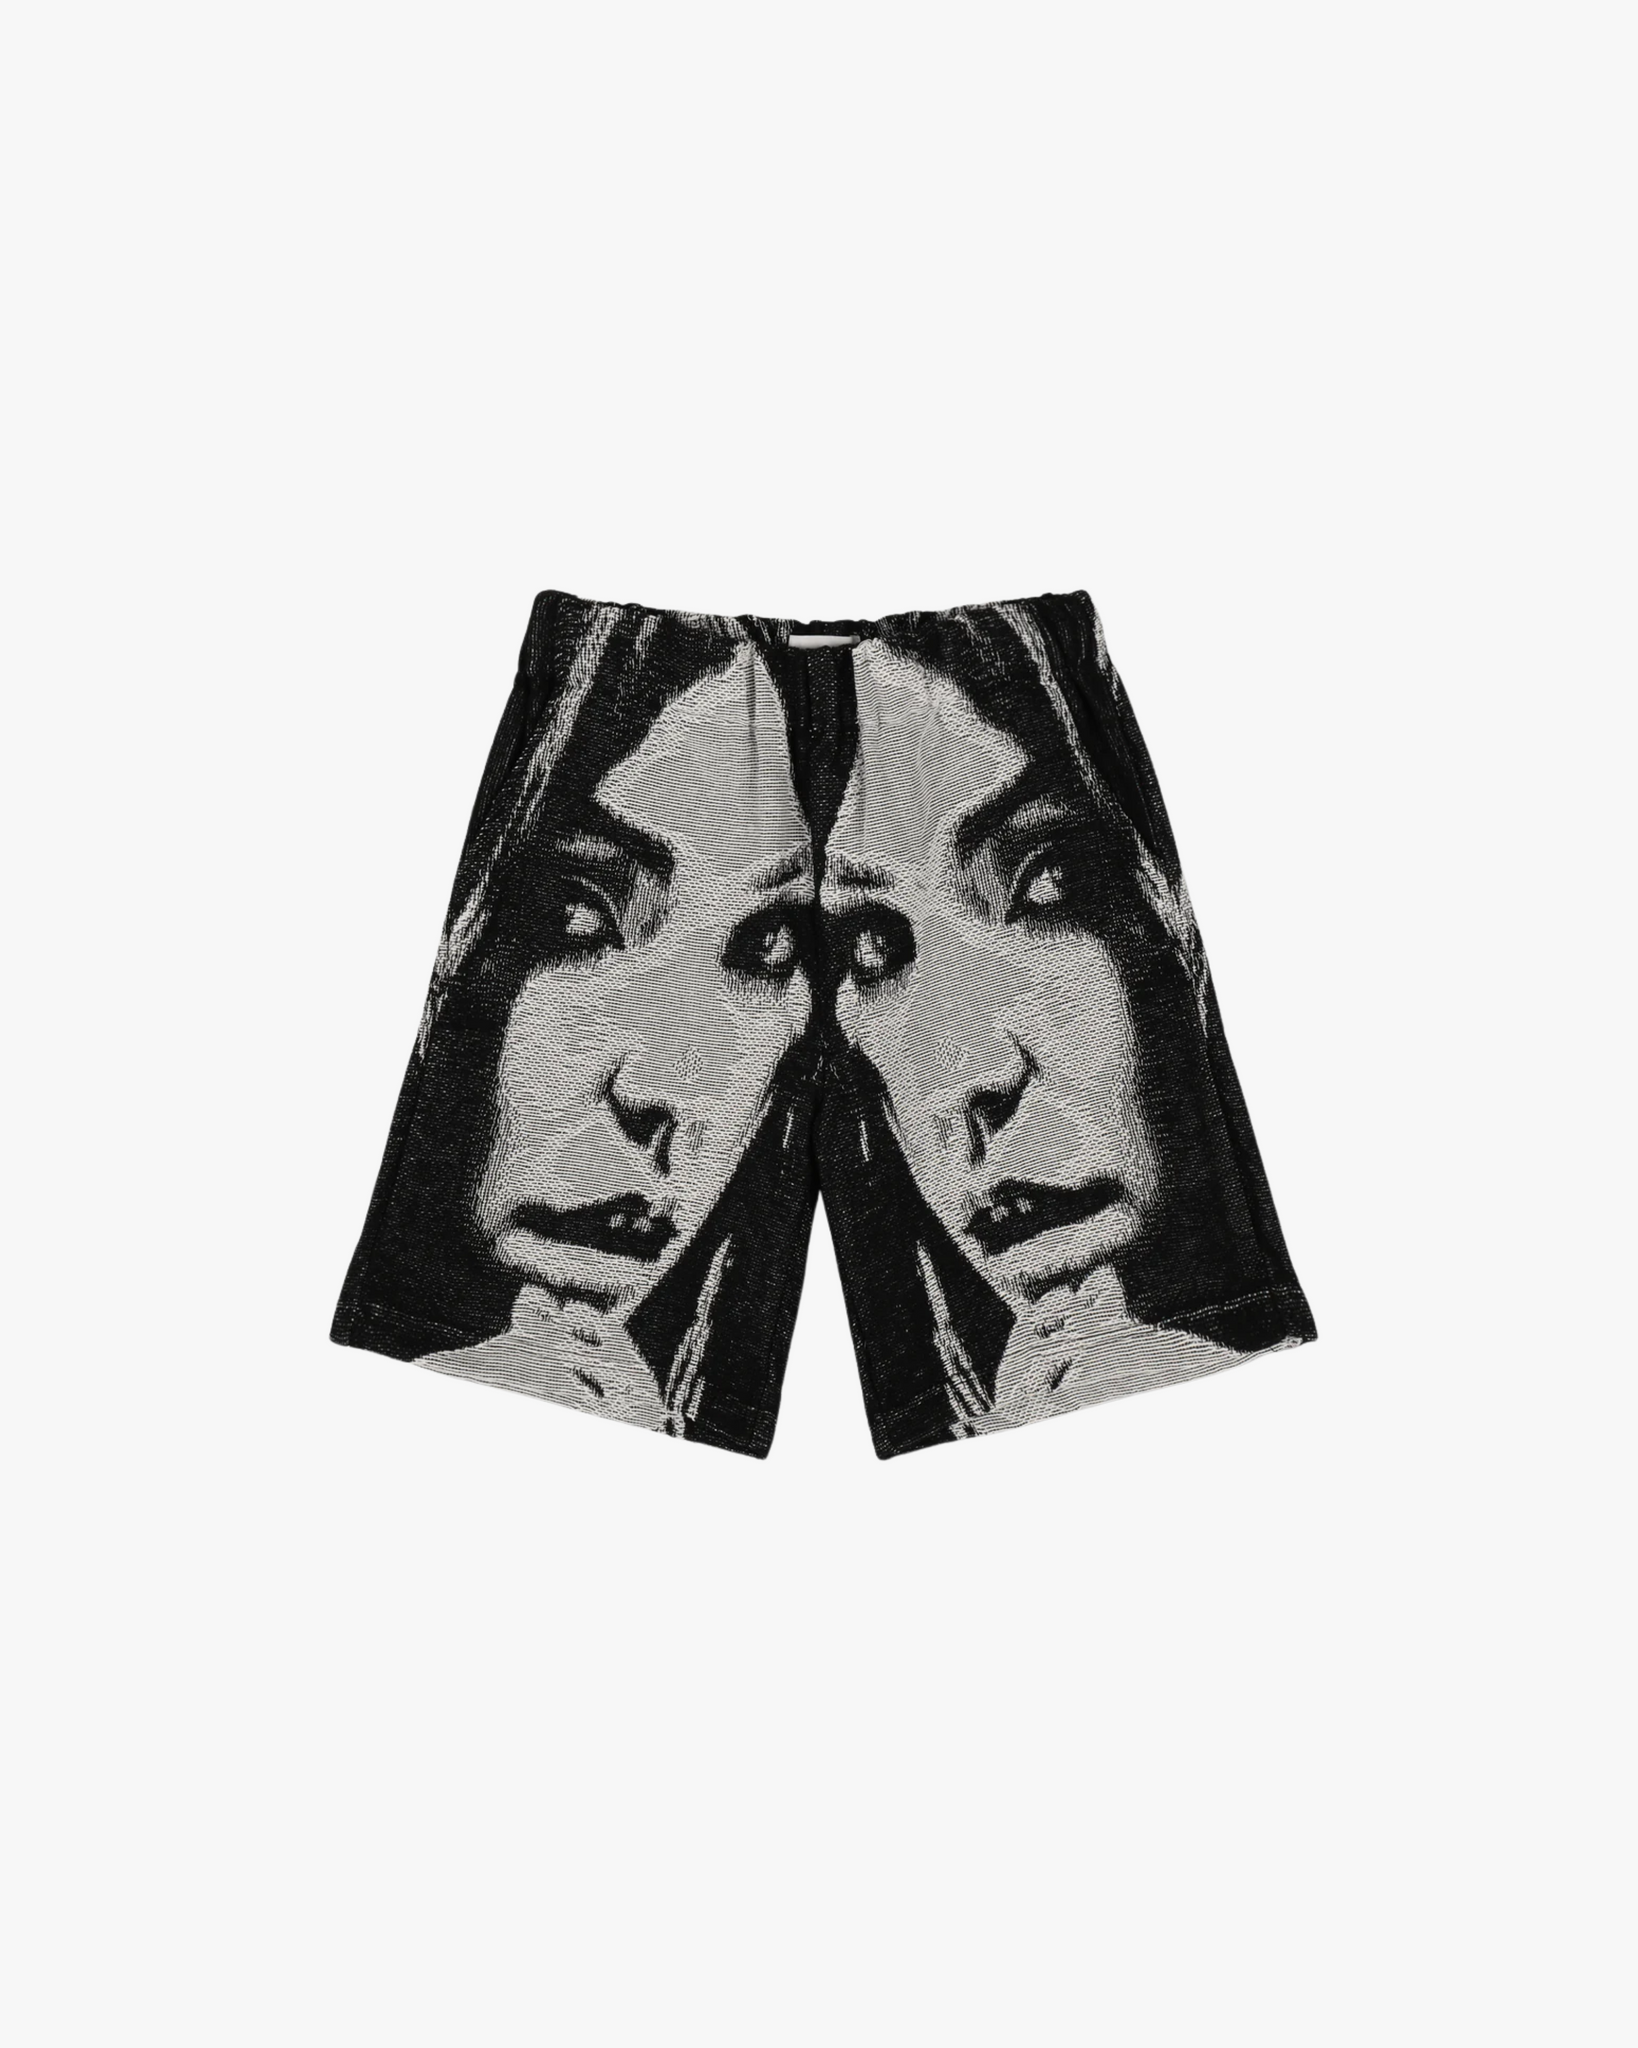 "Her" Mens Shorts